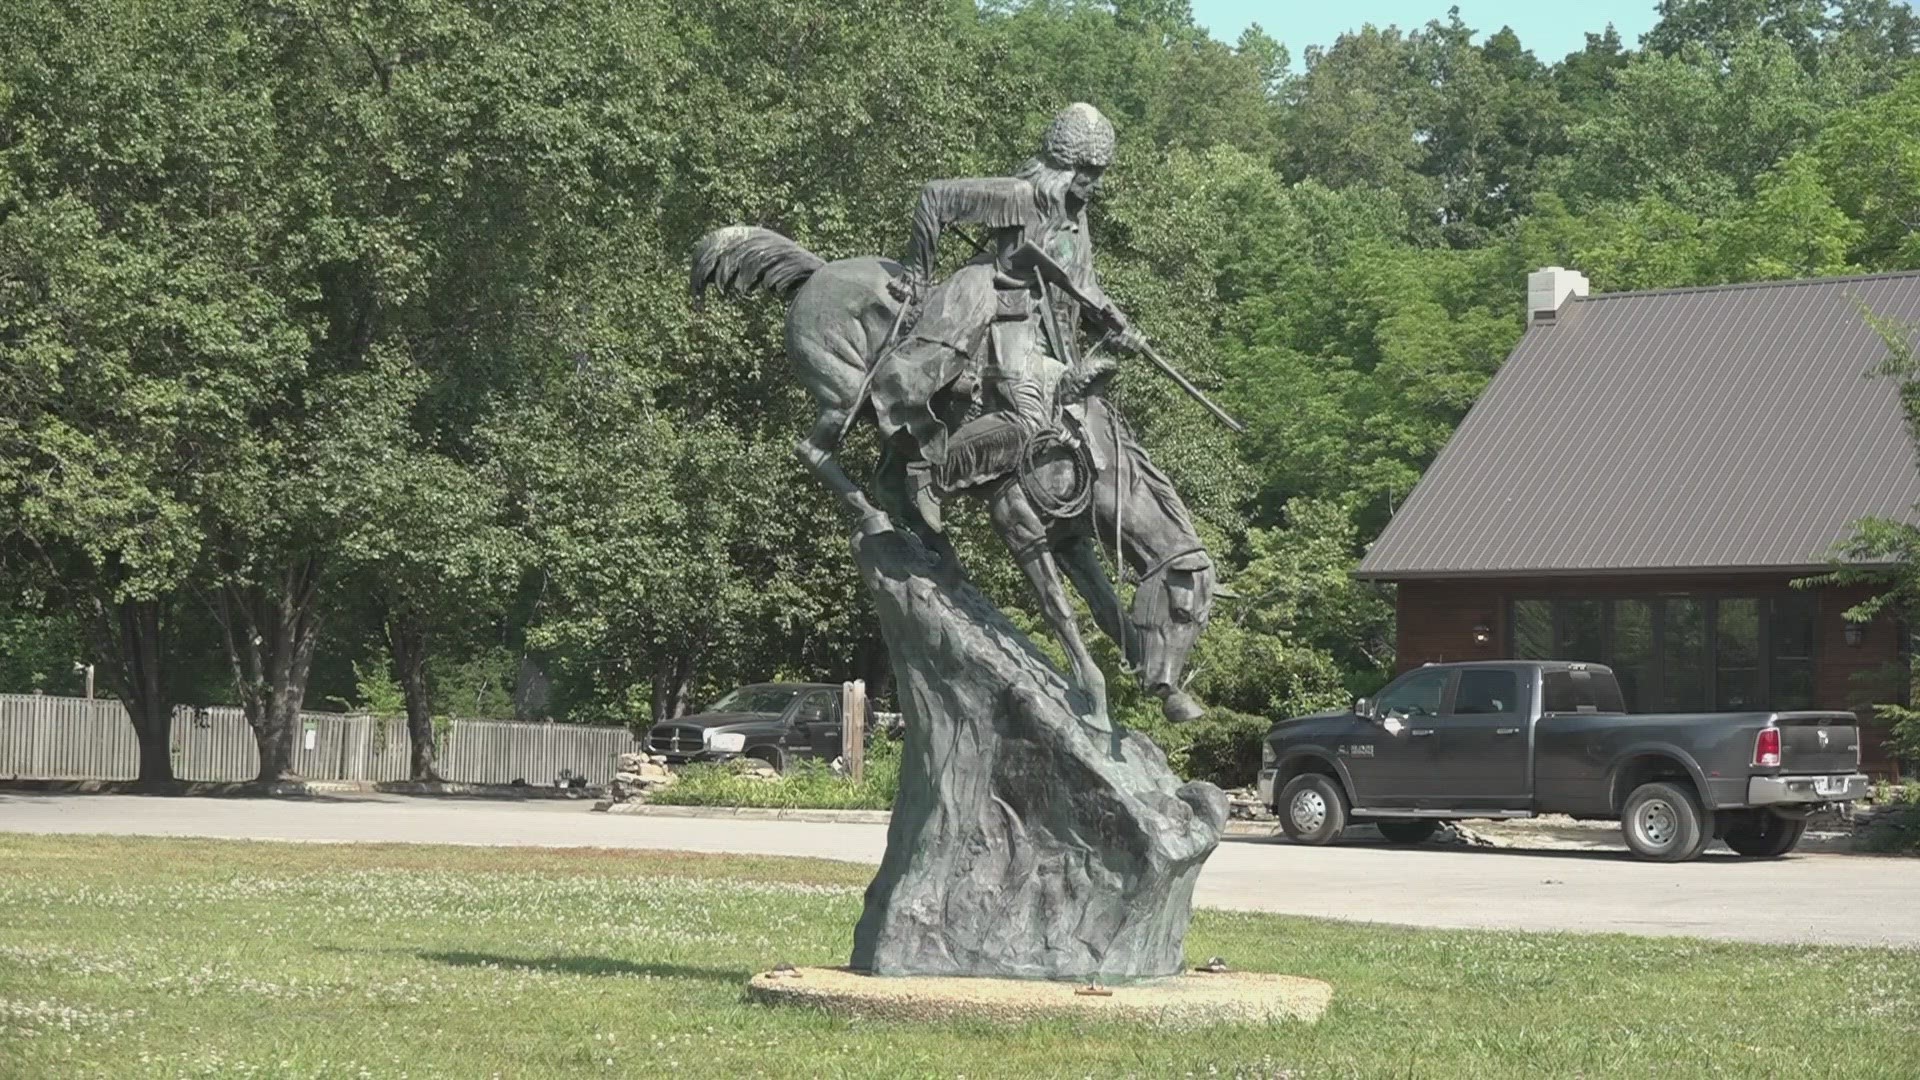 Townsend has all kinds of things you can do like visiting the Mountain Man statue, tubing at Tuckaleechee Caverns or enjoying the river at the Townend Wye.